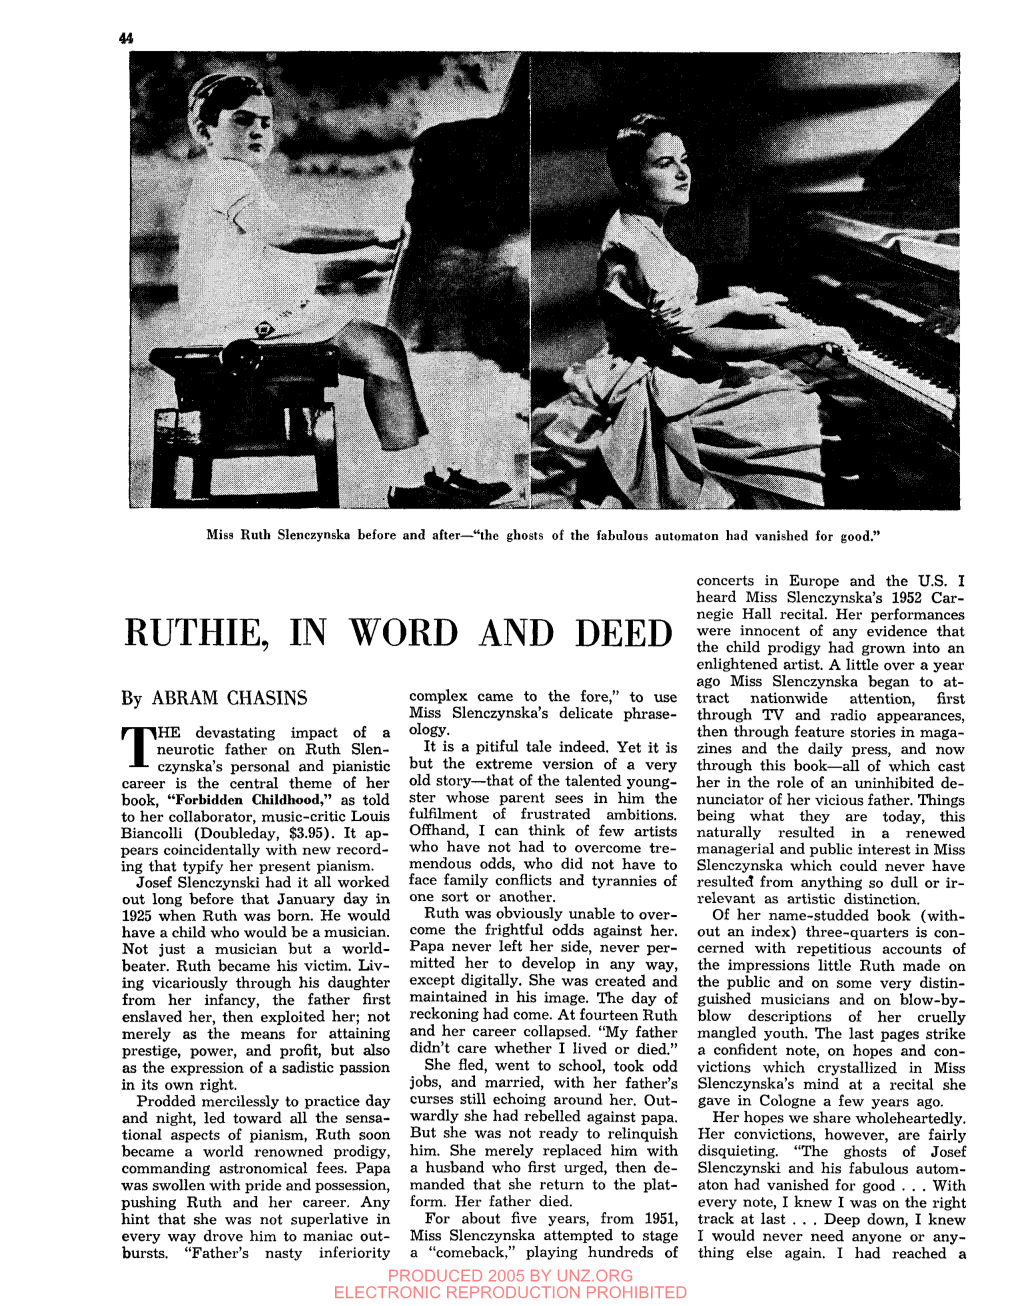 RUTHIE, in WORD and DEED the Child Prodigy Had Grown Into an Enlightened Artist